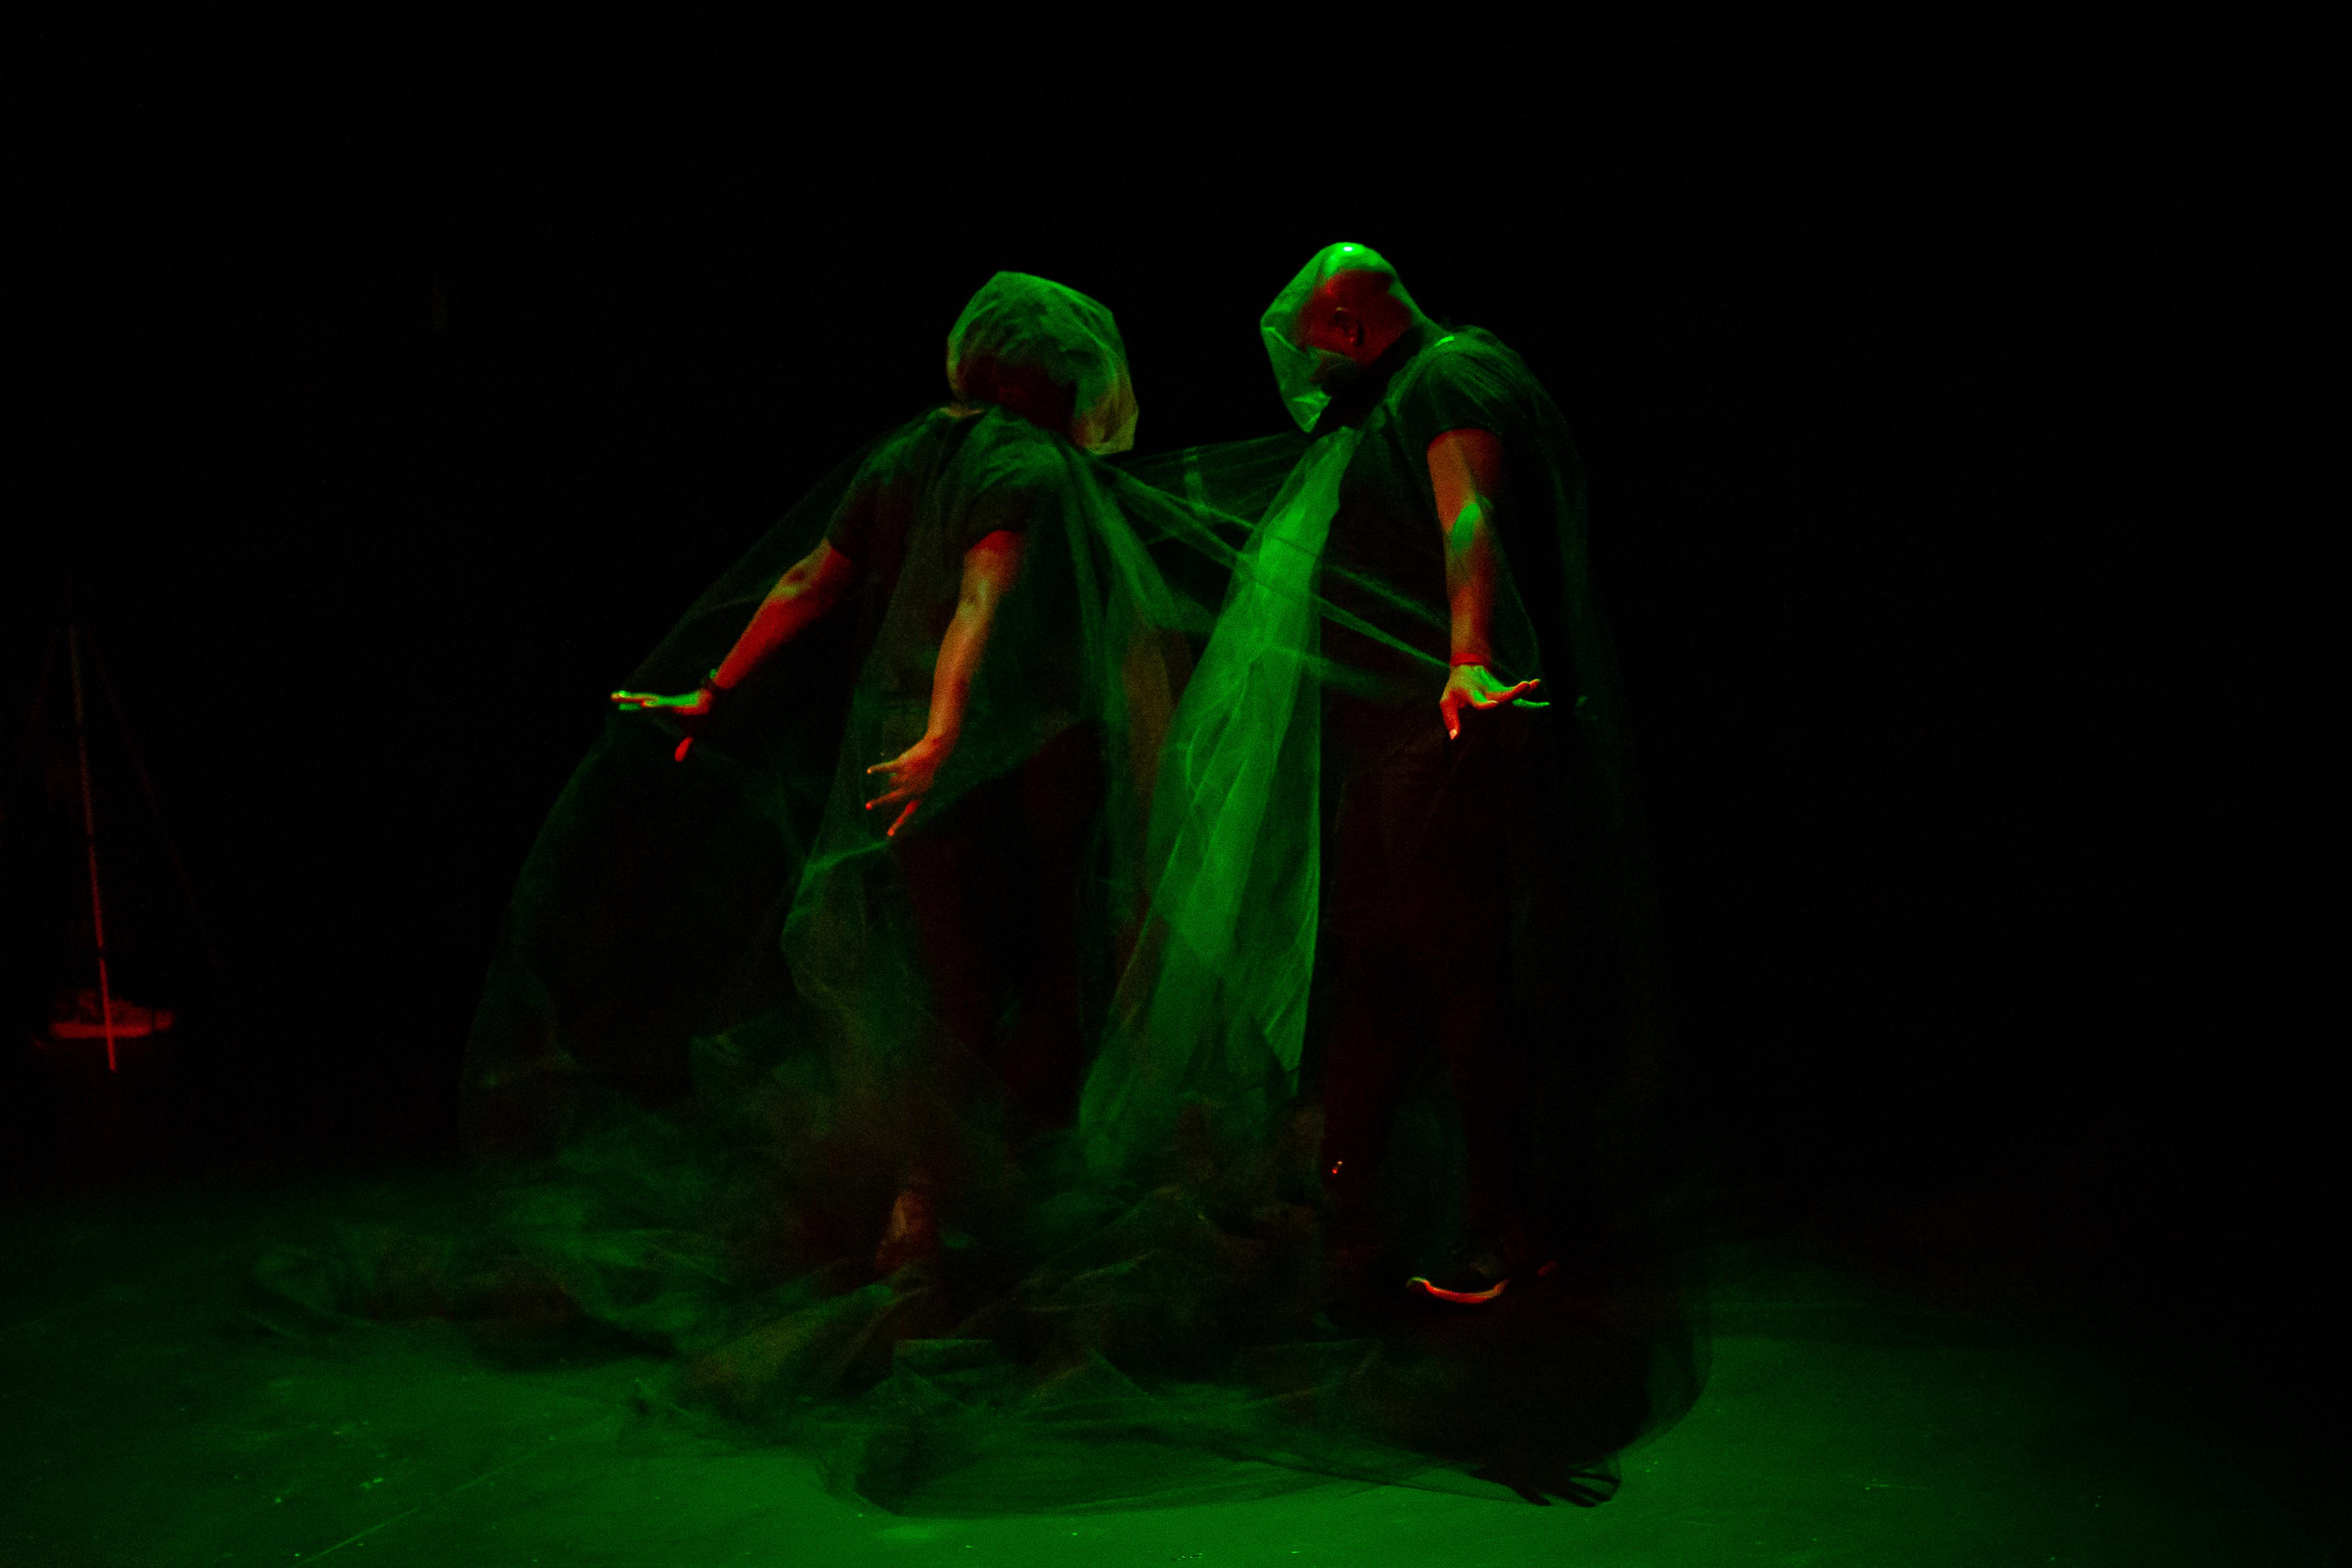 Two shrouded figures stand on stage under soft green light